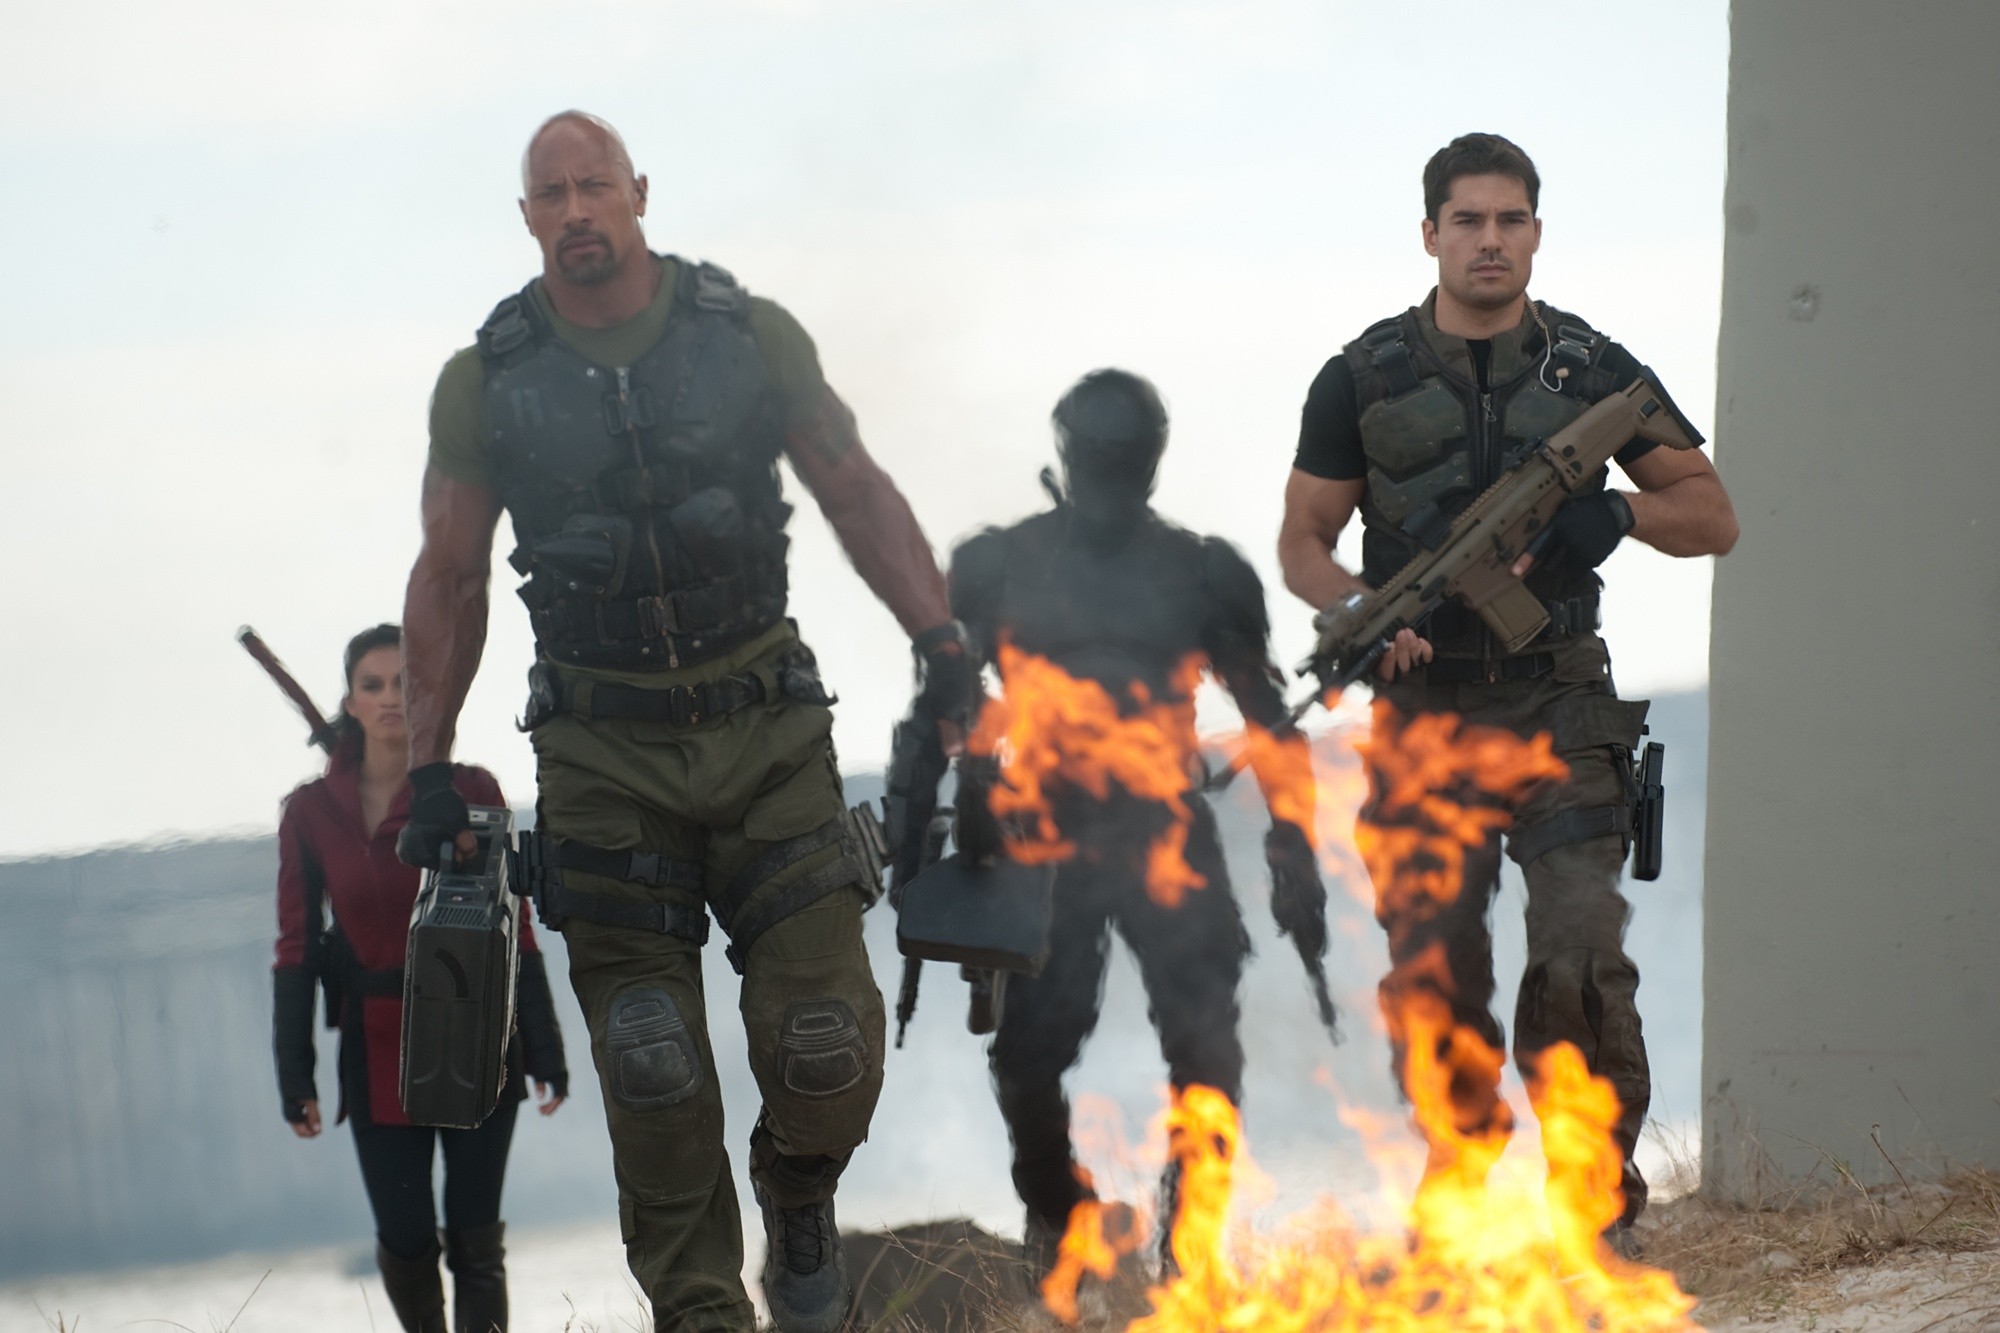 Adrianne Palicki, The Rock, Ray Park and D.J. Cotrona in Paramount Pictures' G.I. Joe: Retaliation (2013)